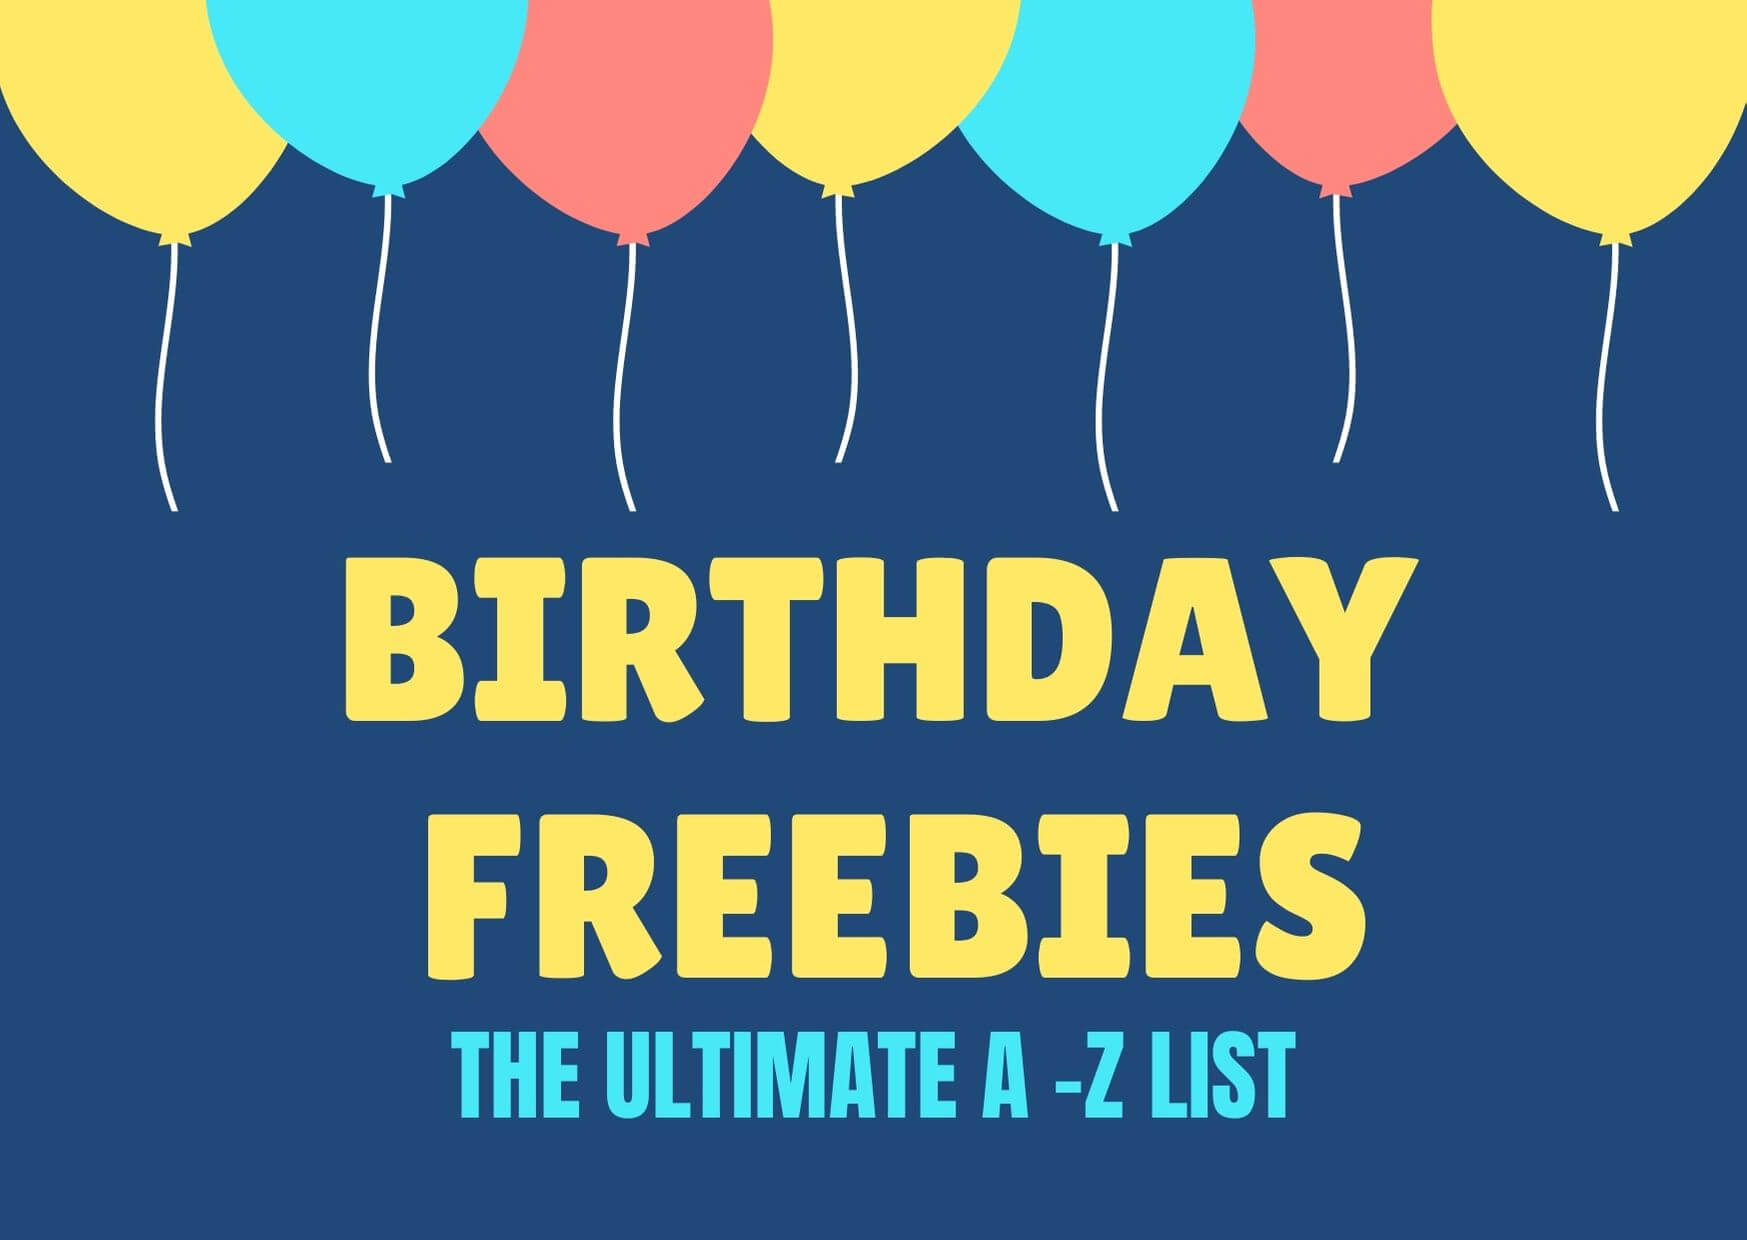 Birthday Freebies Things to get on your Birthday